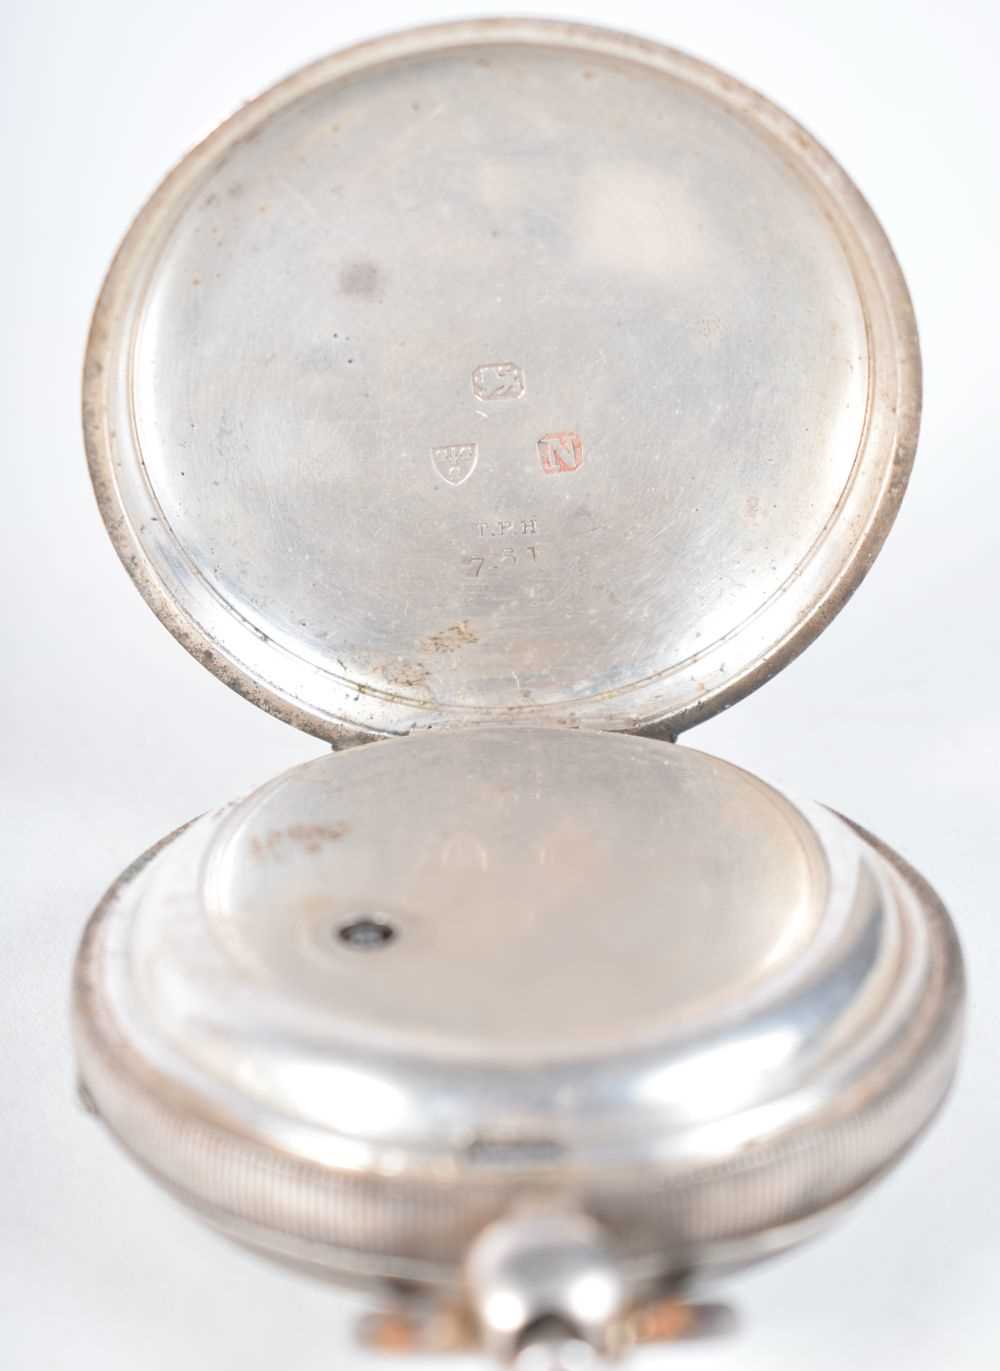 A VICTORIAN SILVER POCKET WATCH. Chester 1895. 154.7 grams. 5 cm diameter. - Image 3 of 4